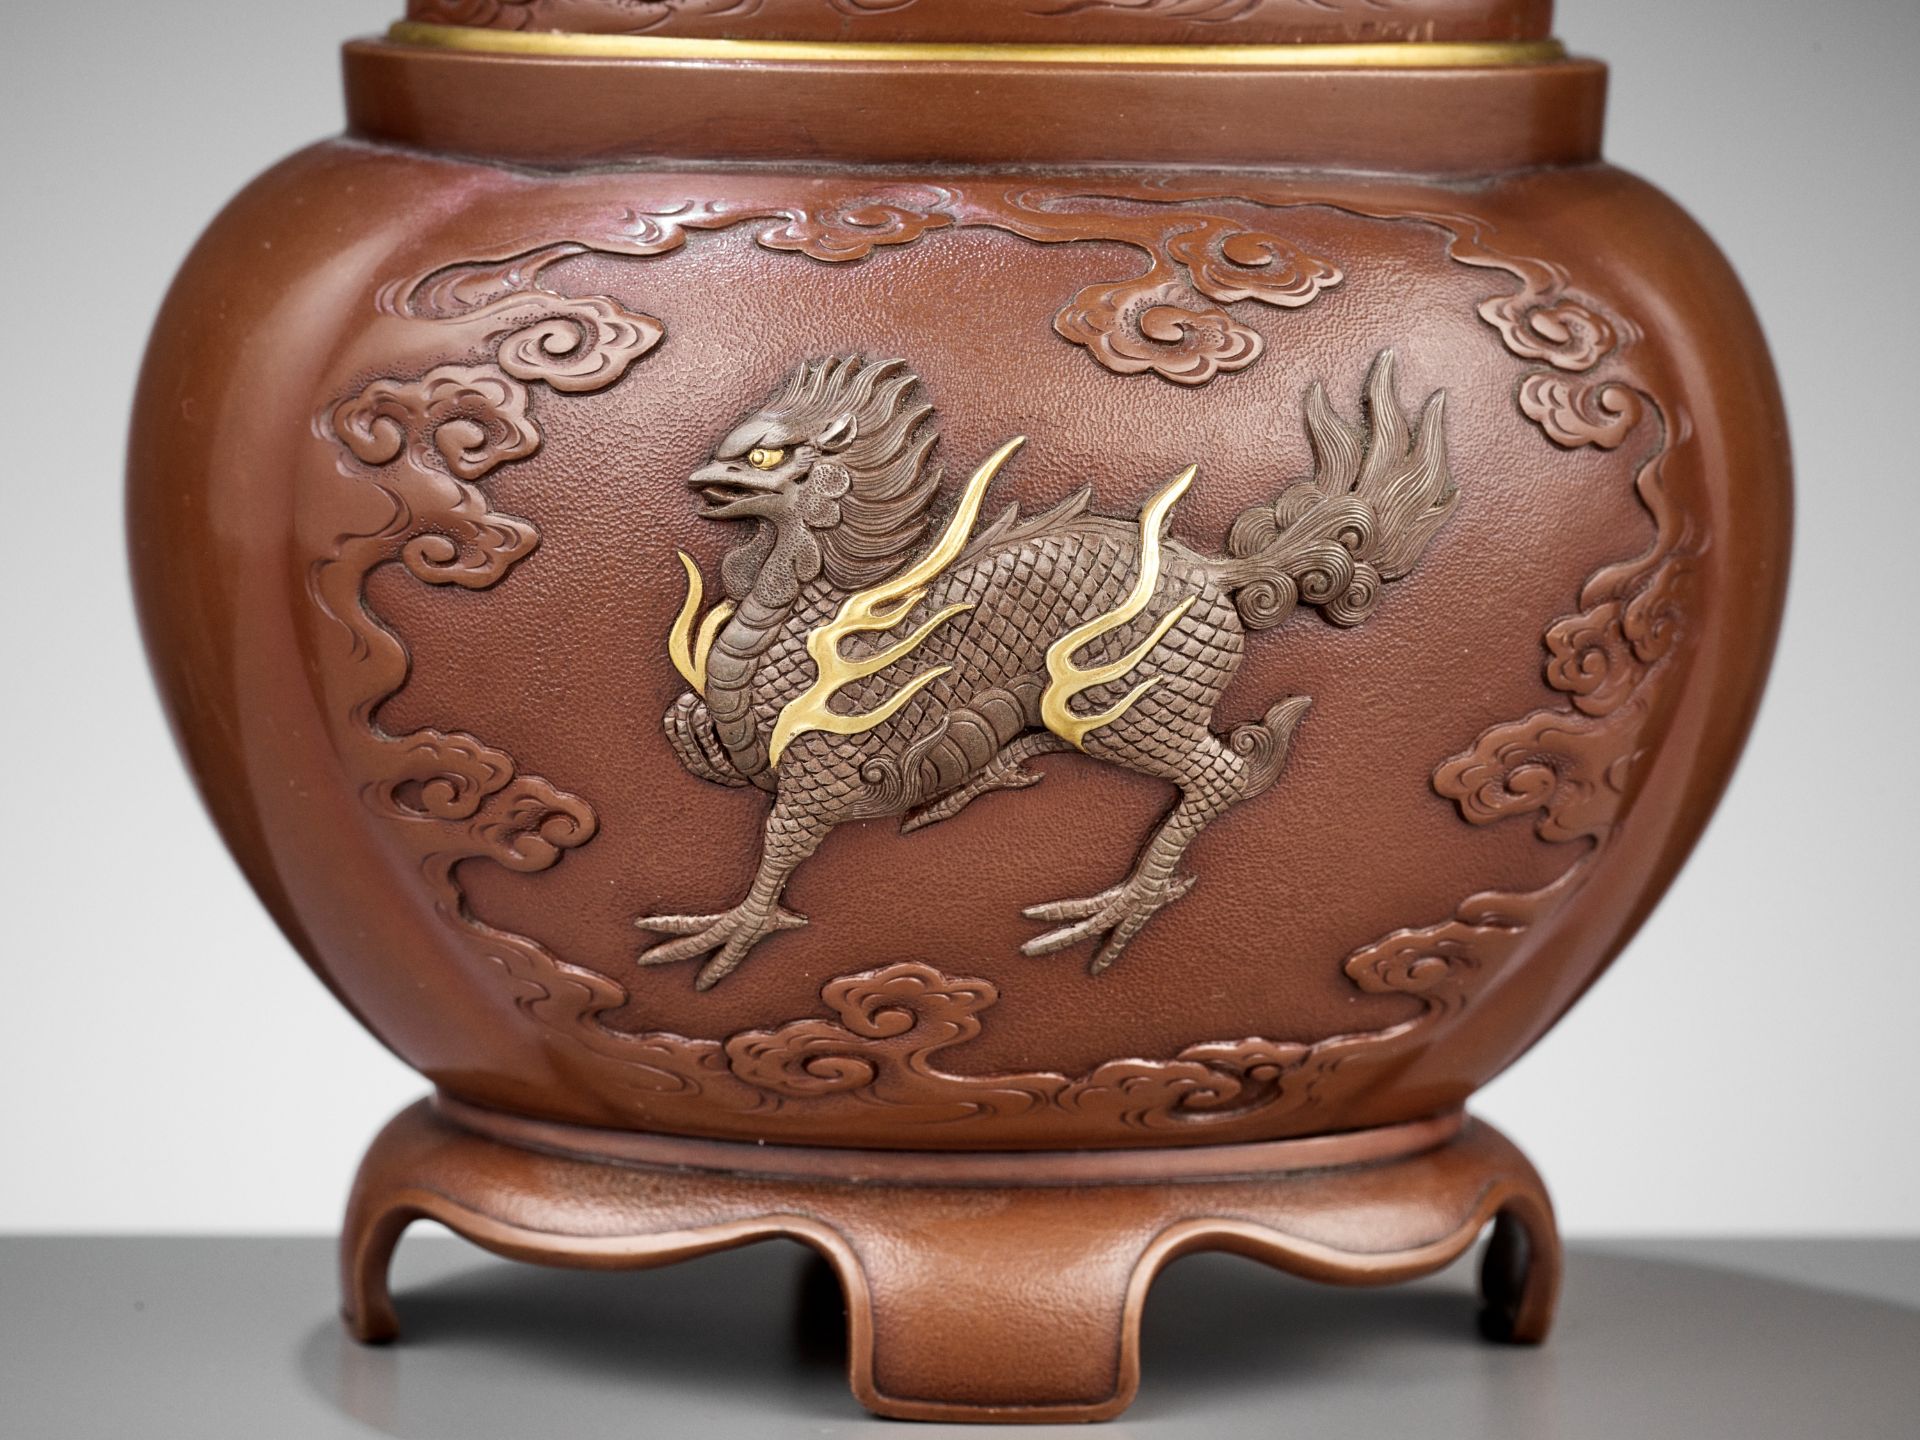 GOTO EIJO: A MASTERFUL INLAID SUAKA (REFINED COPPER) LOBED KORO WITH MYTHICAL BEASTS - Image 4 of 11